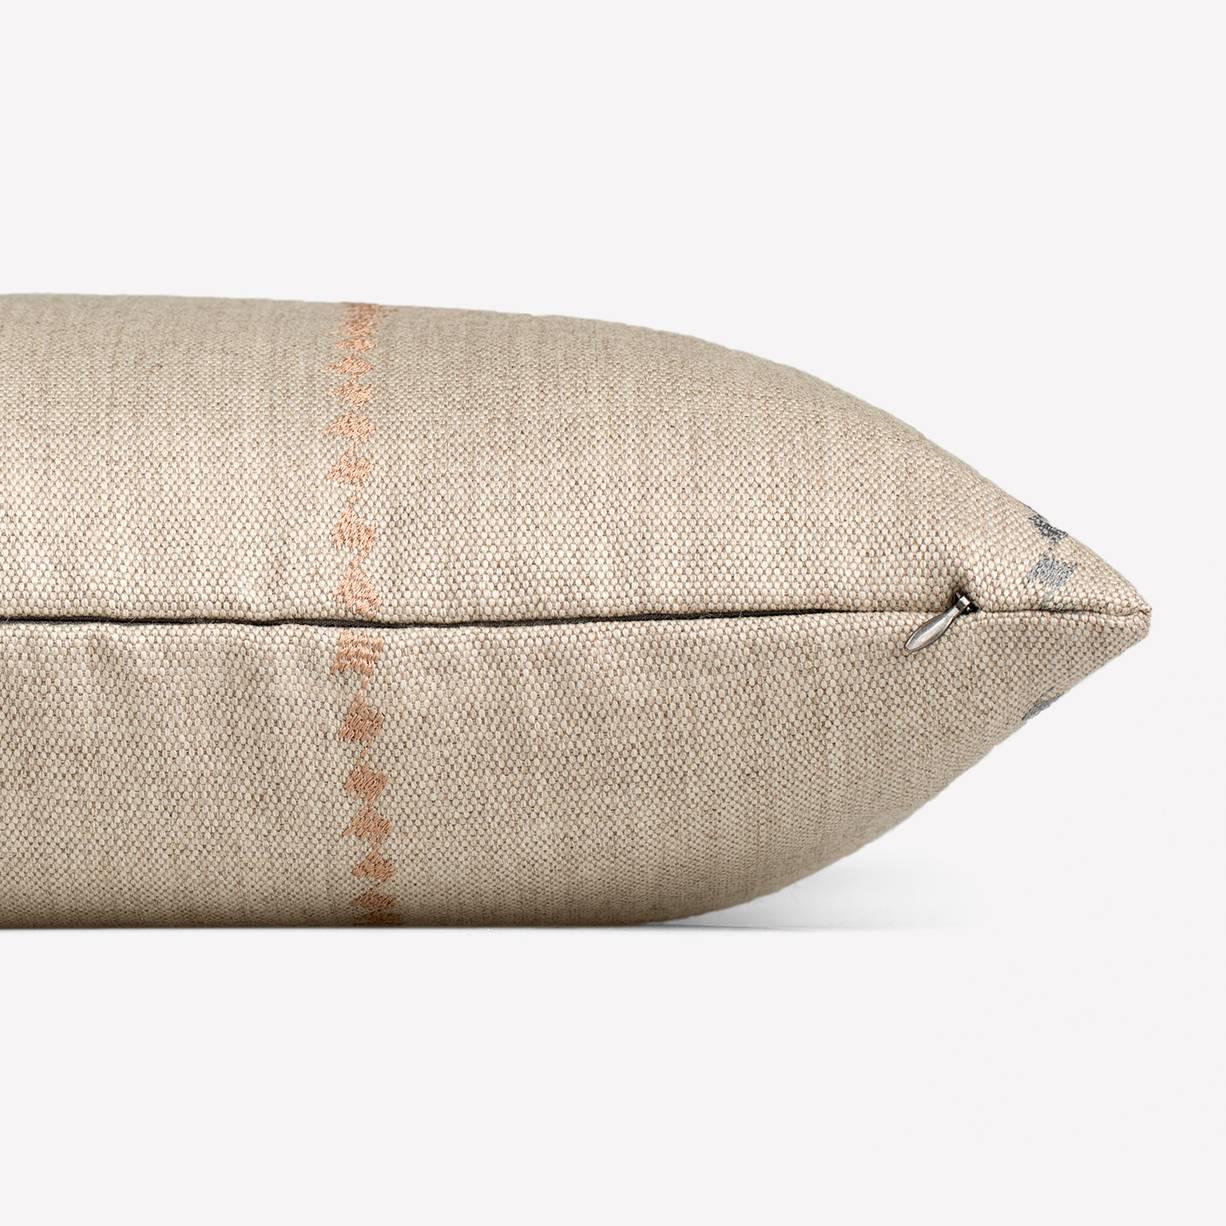 Maharam Pillow
Borders by Hella Jongerius
001 Natural

Borders stems from Hella Jongerius's interest in traditional Central American backstrap weaving, in which the loom is tethered between the weaver's body and a tree or post. Because backstrap